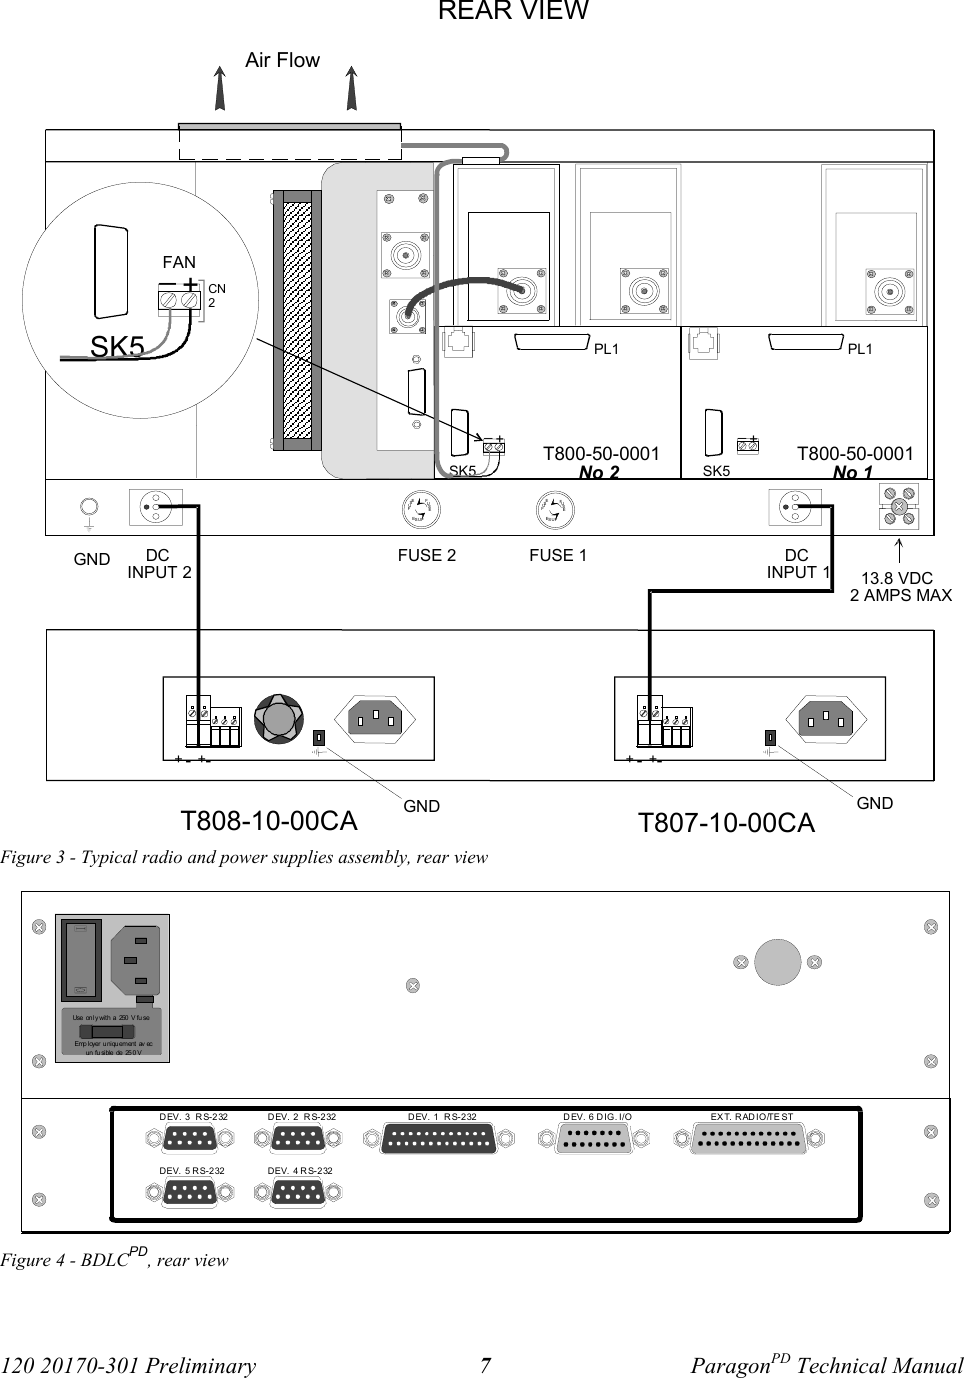 120 20170-301 Preliminary ParagonPD Technical Manual7Figure 3 - Typical radio and power supplies assembly, rear viewFigure 4 - BDLCPD, rear view Emp l oyer  u ni qu em ent  av ecun  fu si ble  de  25 0 VUse  on l y wi t h  a  250  V  fu s eDEV. 3  RS-232DEV. 5  RS-232D EV. 2  R S- 2 32DEV. 4  RS-232DEV. 1  RS-232 DEV. 6 DIG. I/O EXT. RADIO/TESTT808-10-00CAT807-10-00CAREAR VIEWAir FlowGNDDCINPUT 1FUSE 1FUSE 2DCINPUT 2 13.8 VDC2 AMPS MAXFUSEFUSEFUSEFUSEFUSEFUSE+-+-+-+-GNDGNDT800-50-0001No 1PL1SK5T800-50-0001No 2PL1SK5_+_+SK5_+FANCN2